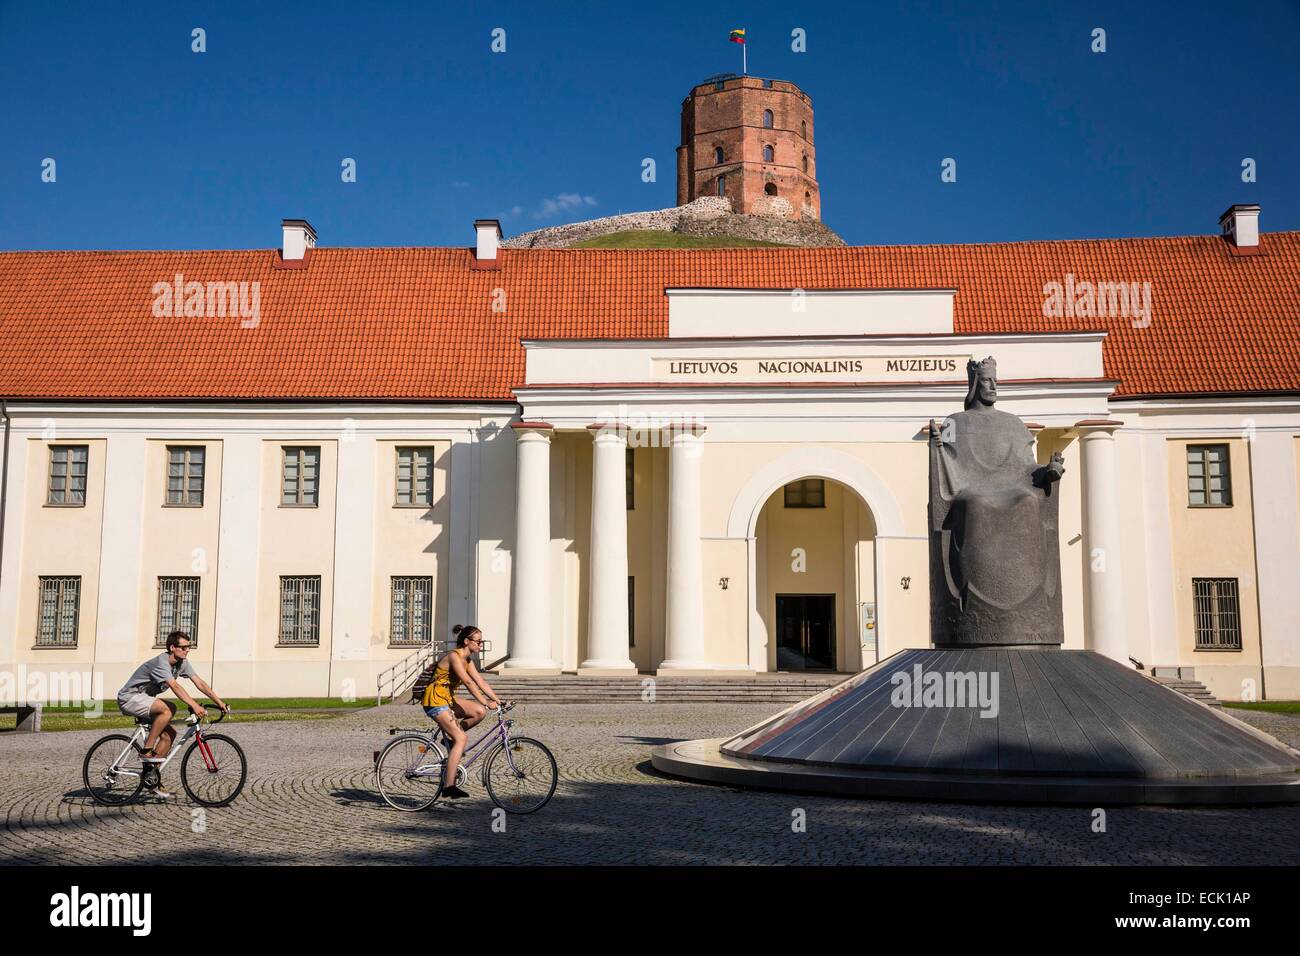 Lithuania (Baltic States), Vilnius, the New Arsenal, historical and ethnographic exhibition in the National Museum, Mindaugas statue, the first King of Lithuania in the 13th century, view of the Gediminas' Tower of the Upper Castle Stock Photo